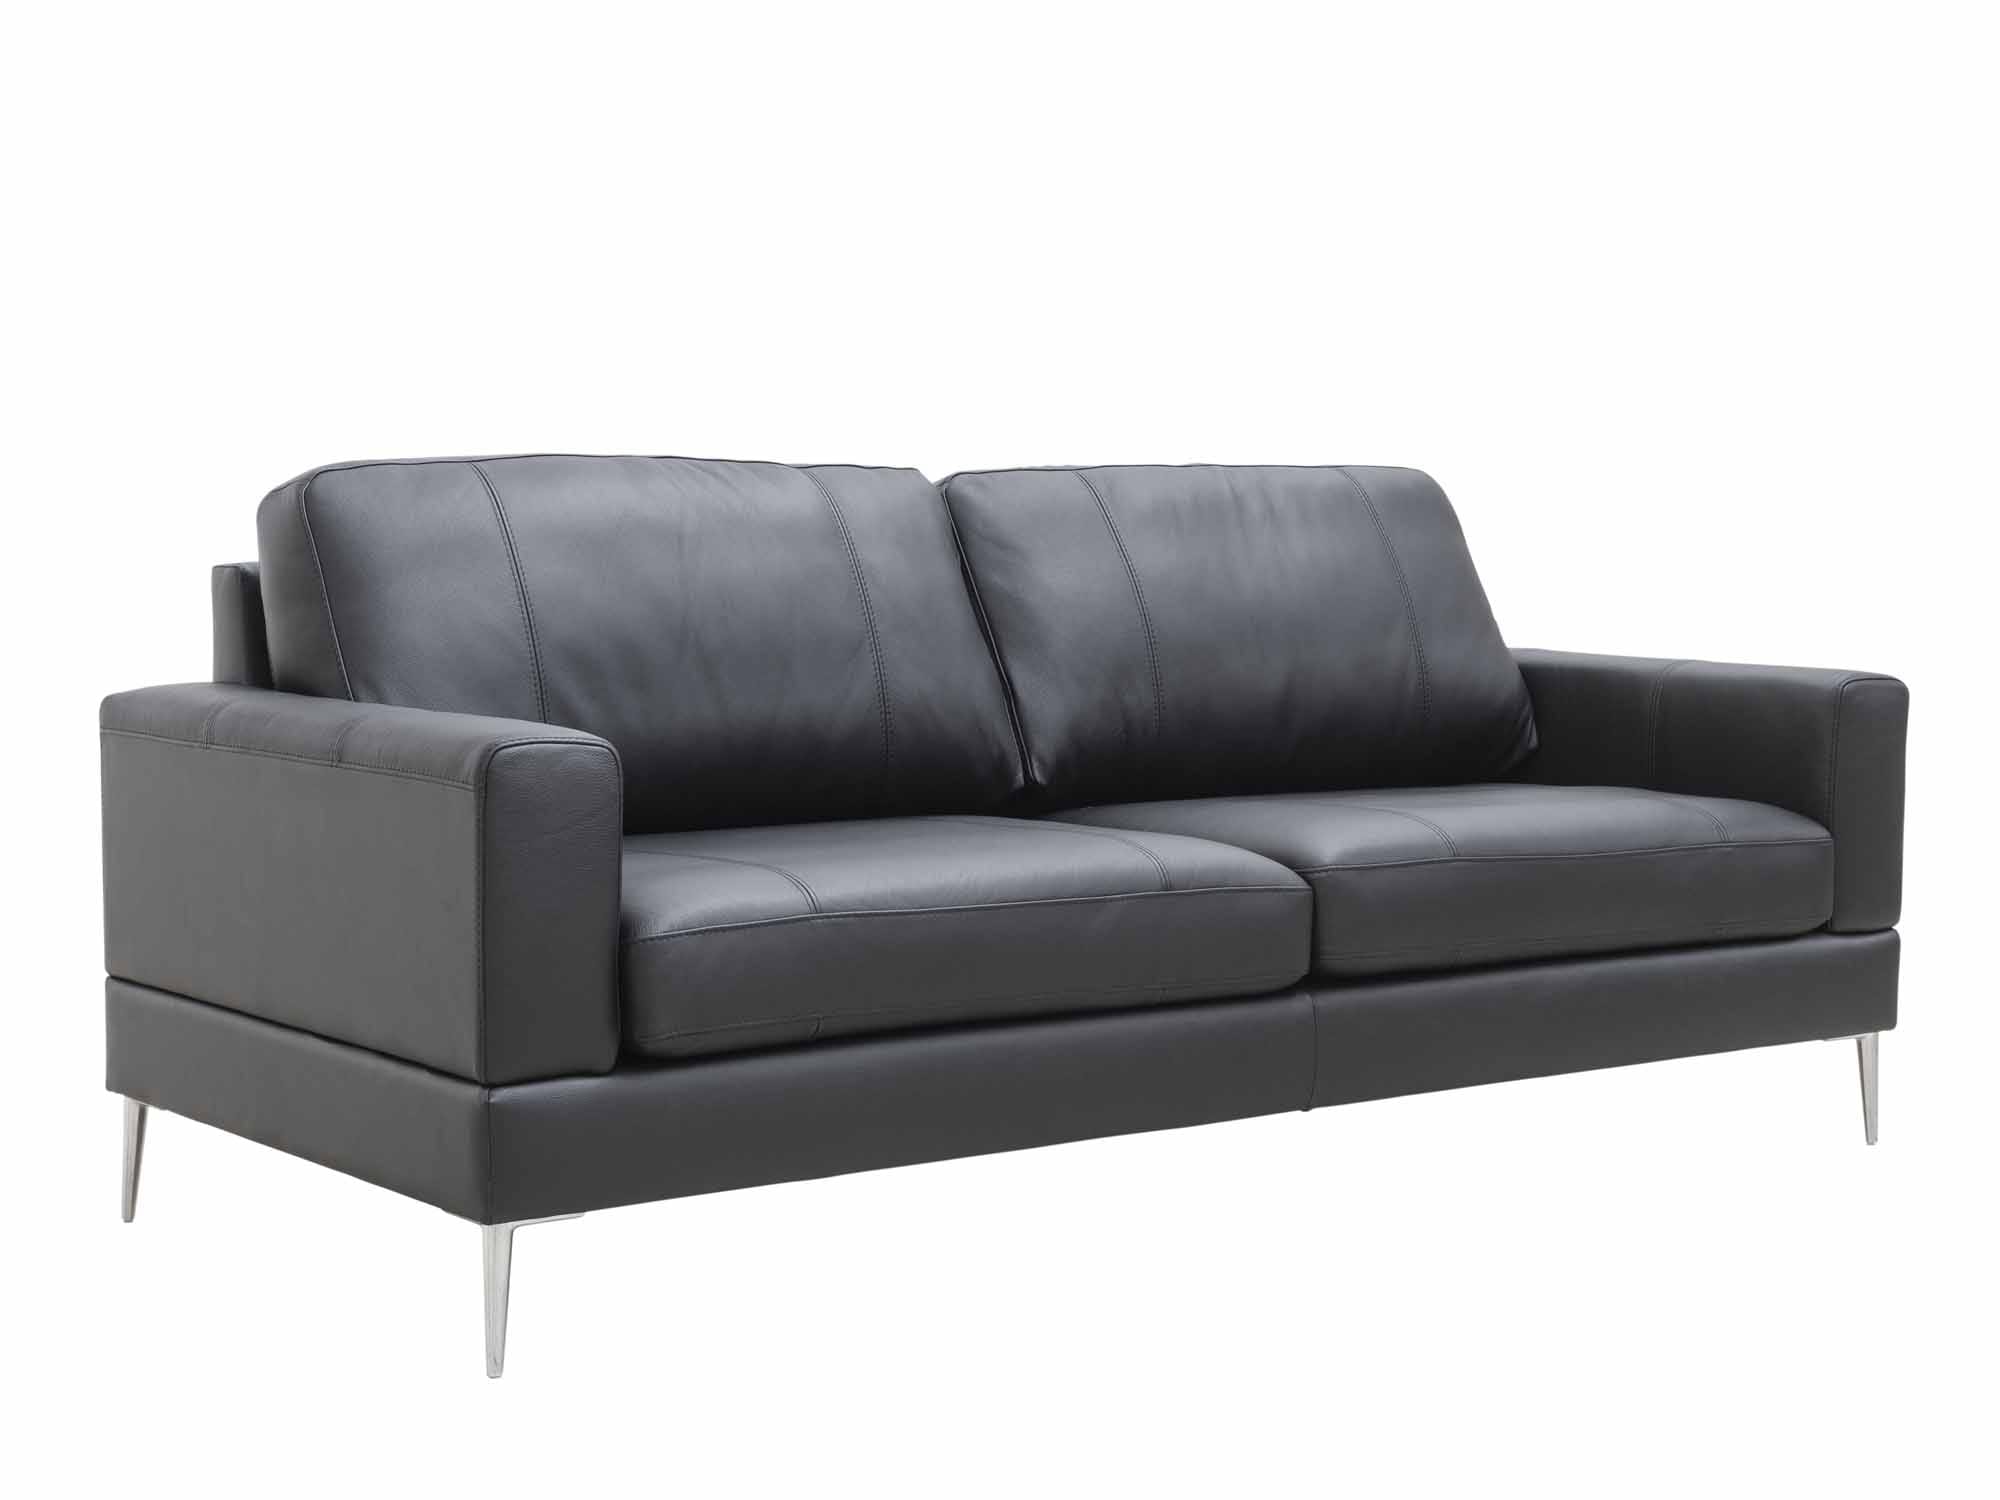 Special Order Capri 3 Seater Sofa by Luonto Furniture